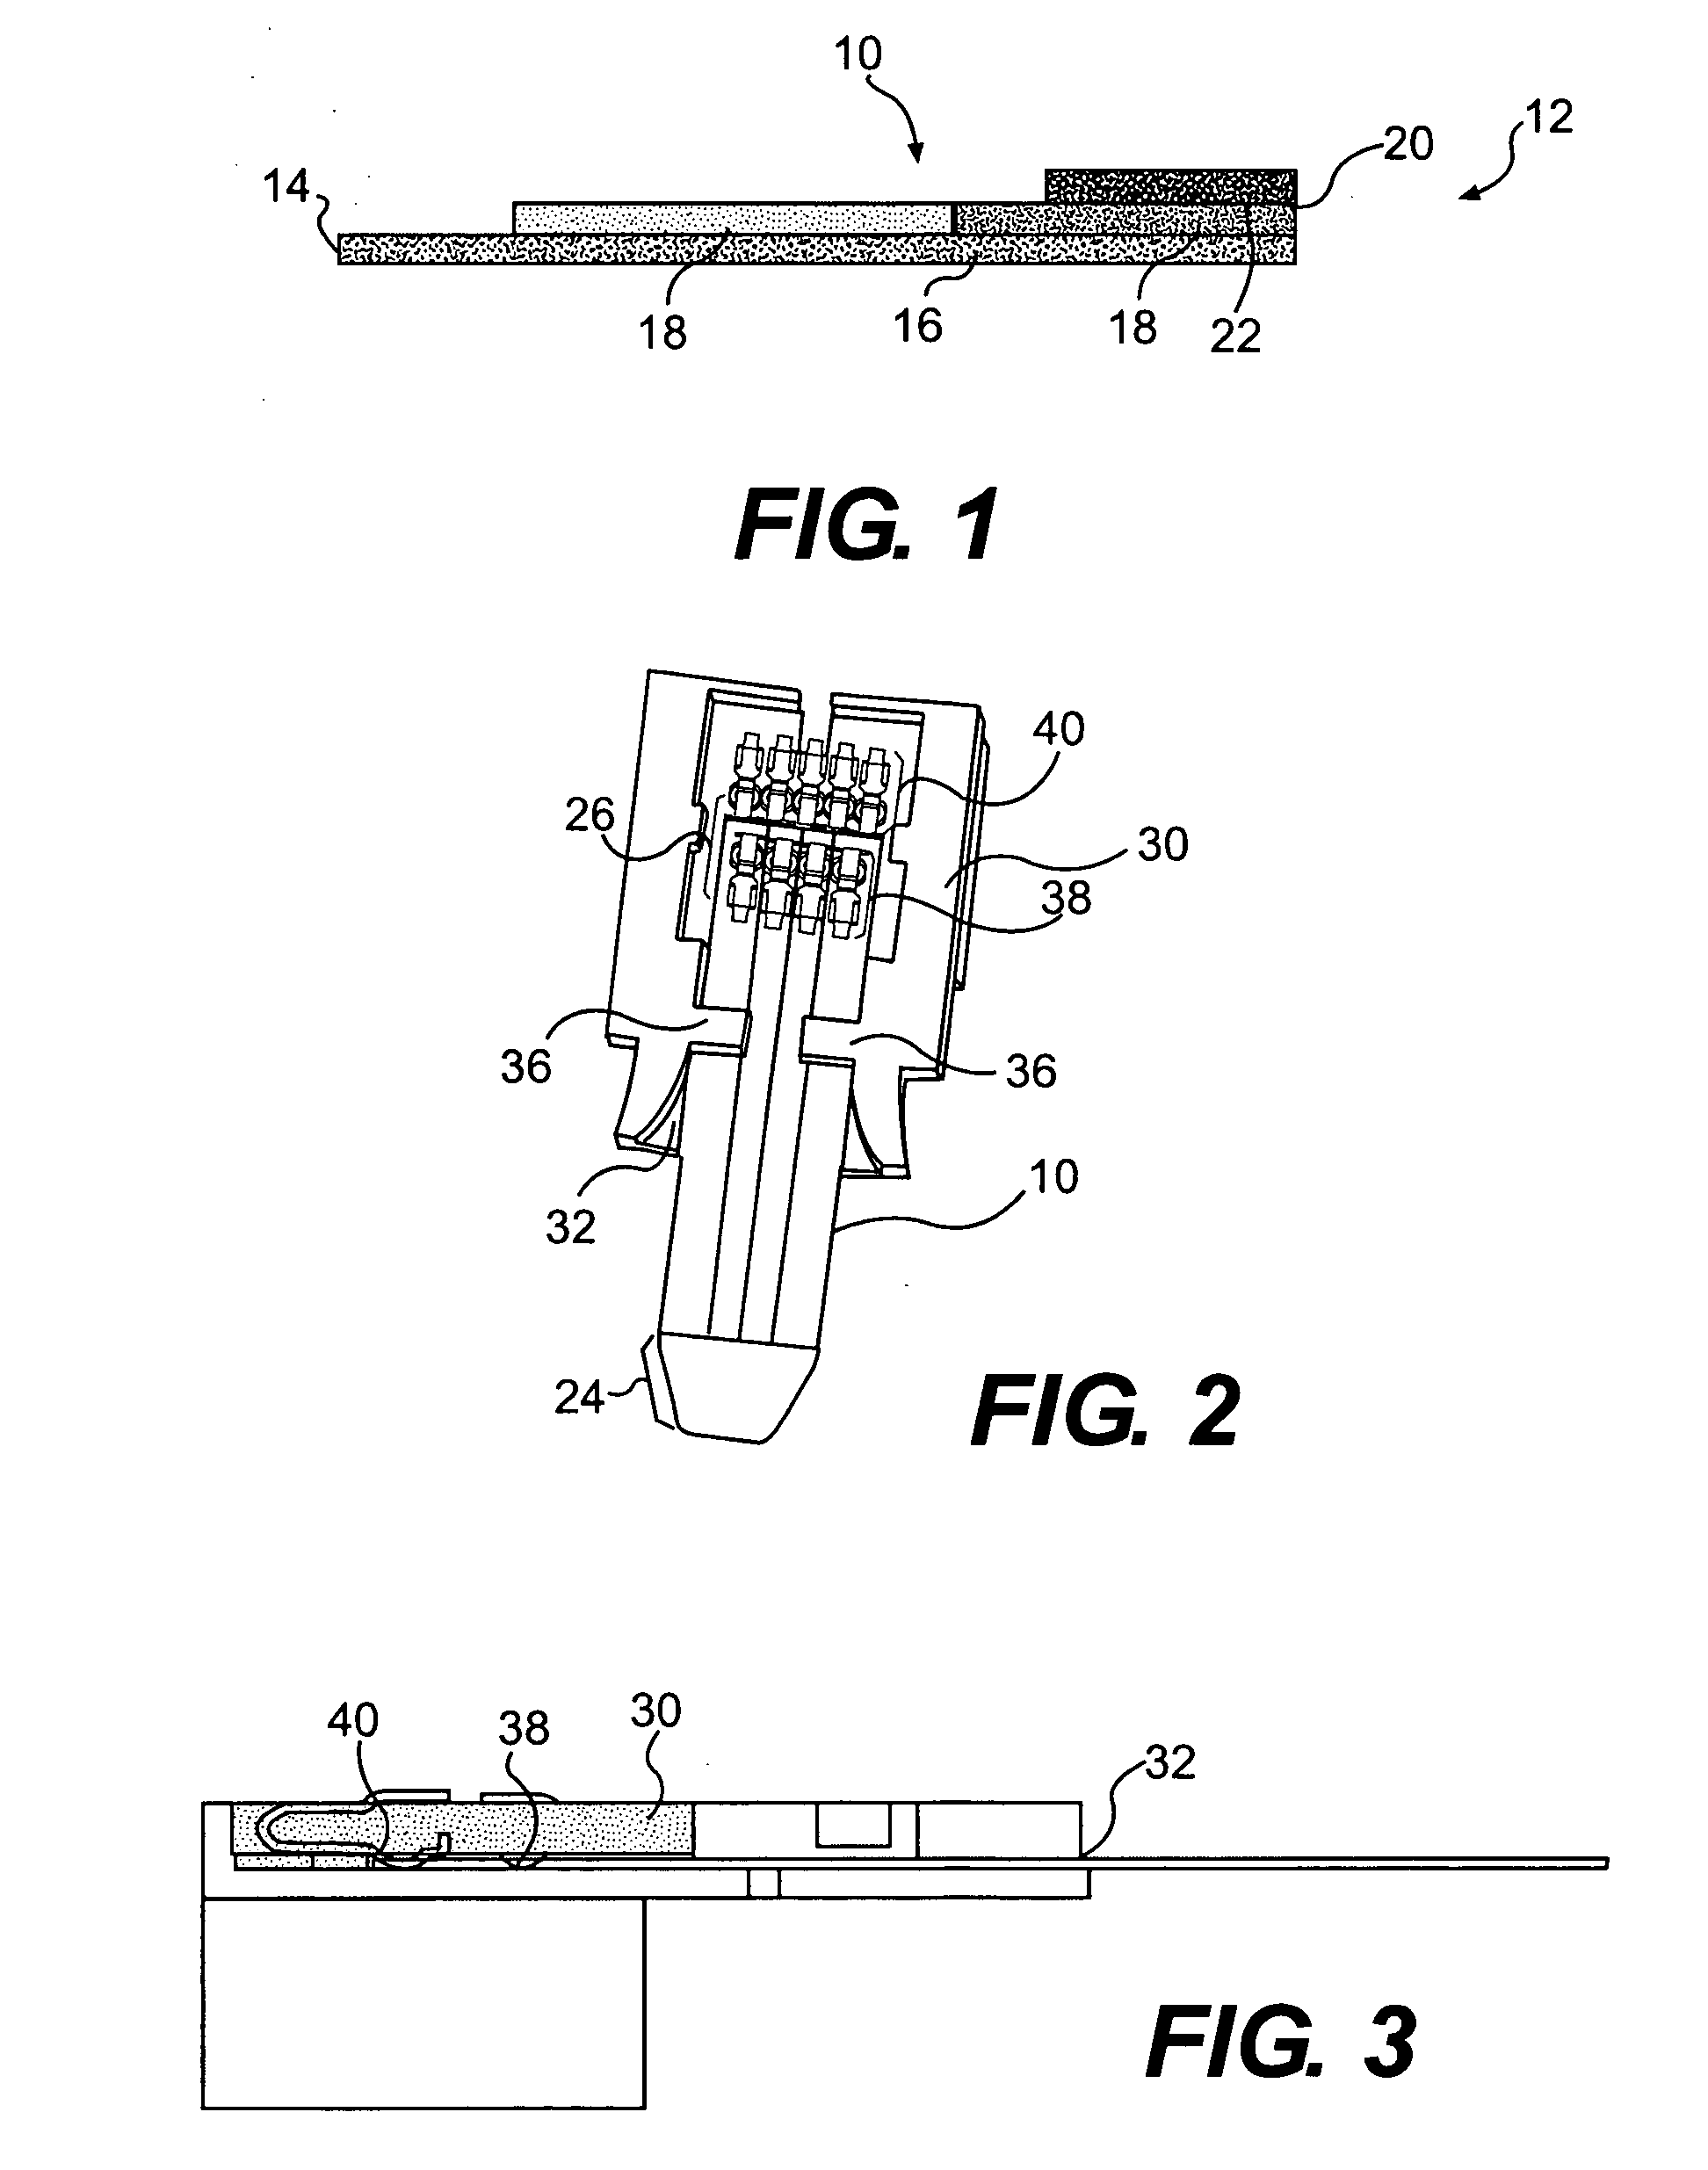 Diagnostic strip coding system and related methods of use